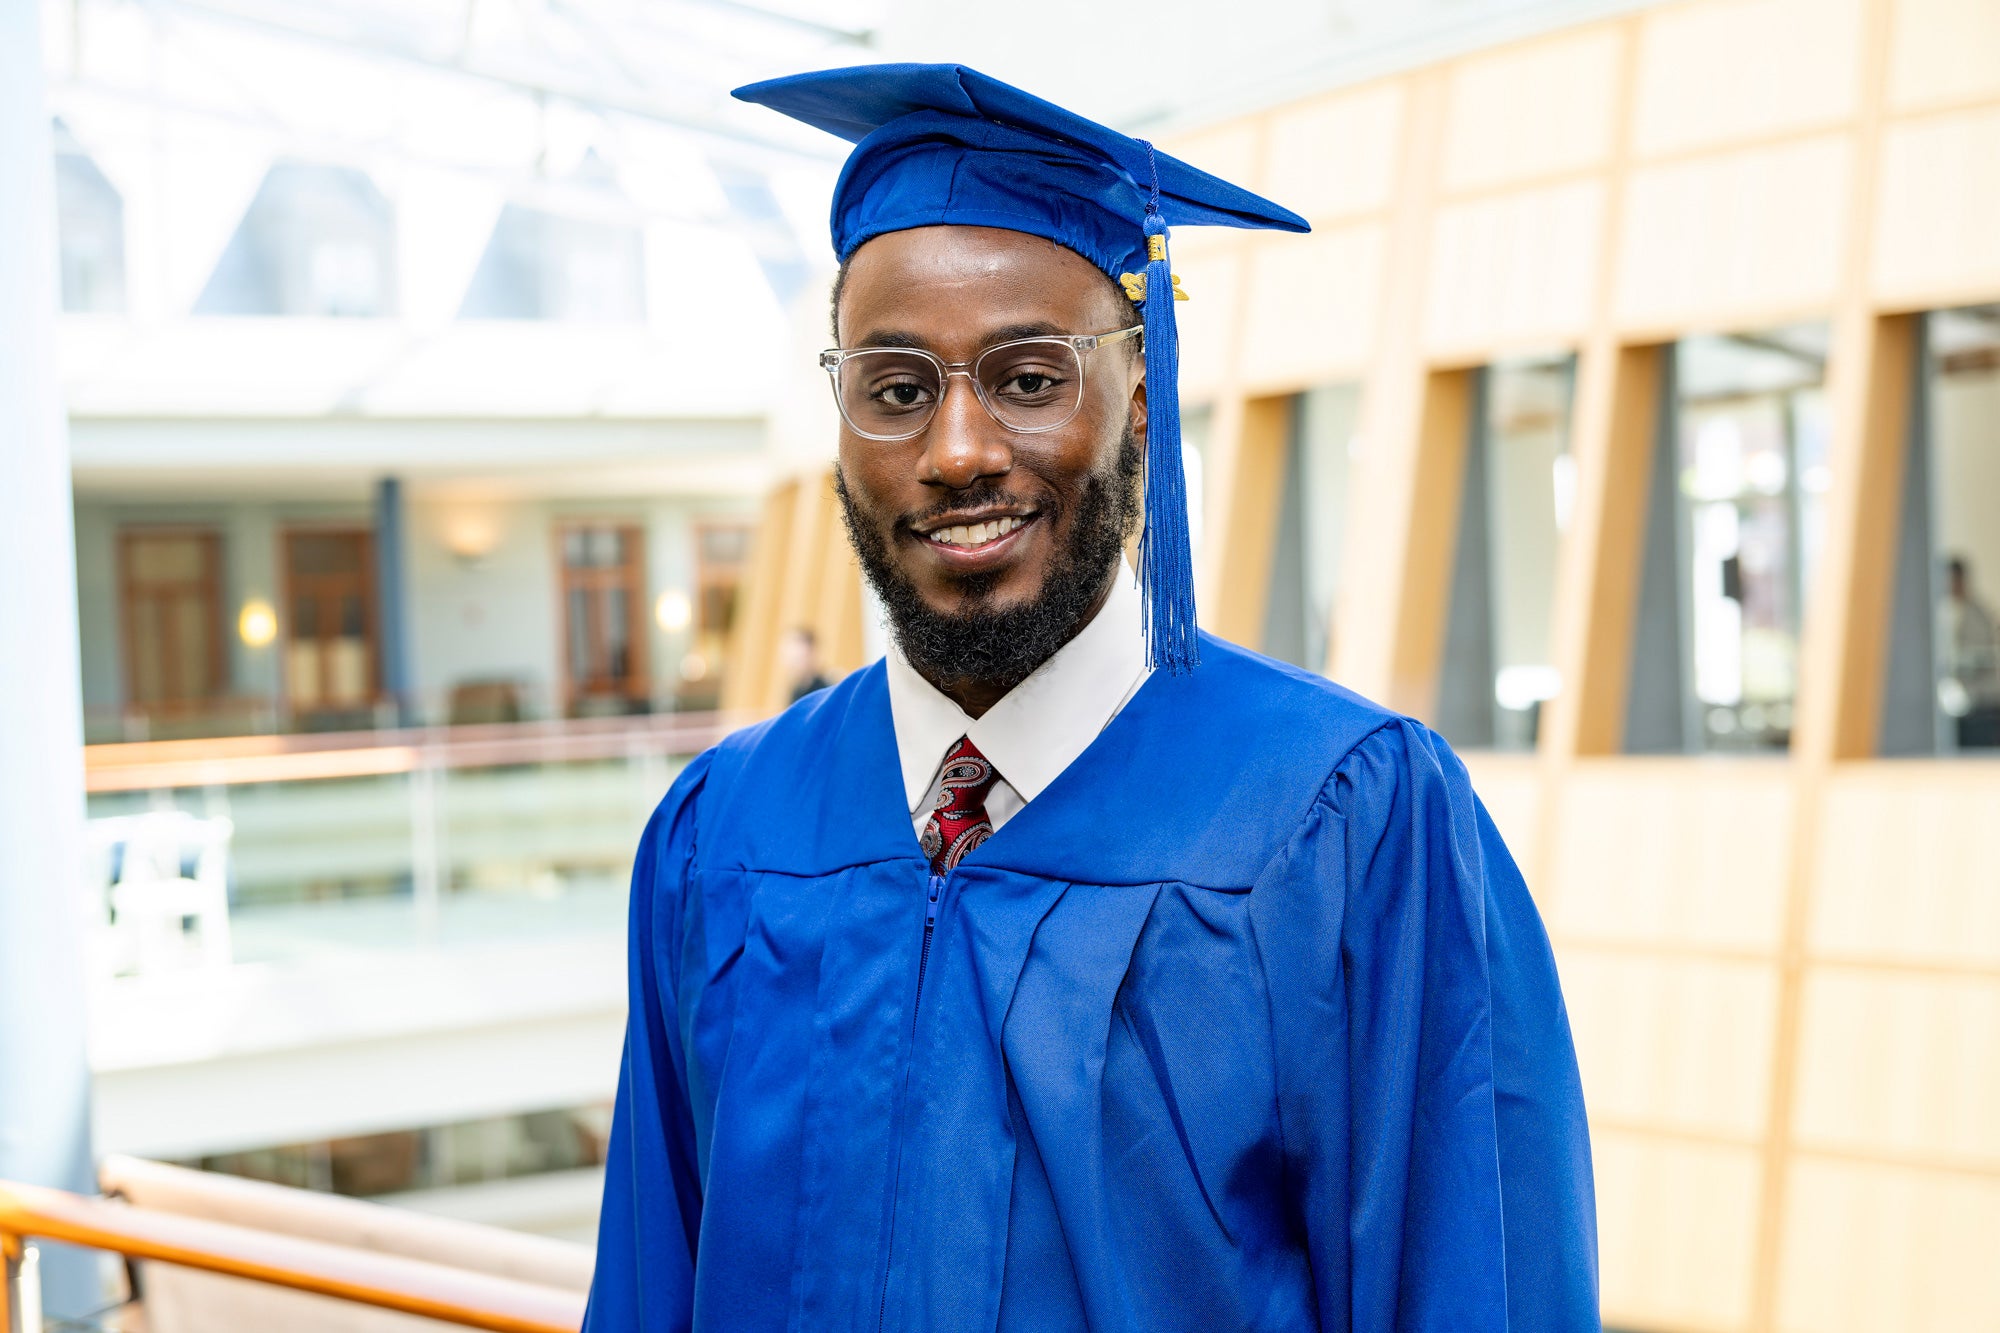 Mustafah Muhammad in graduation cap and gown